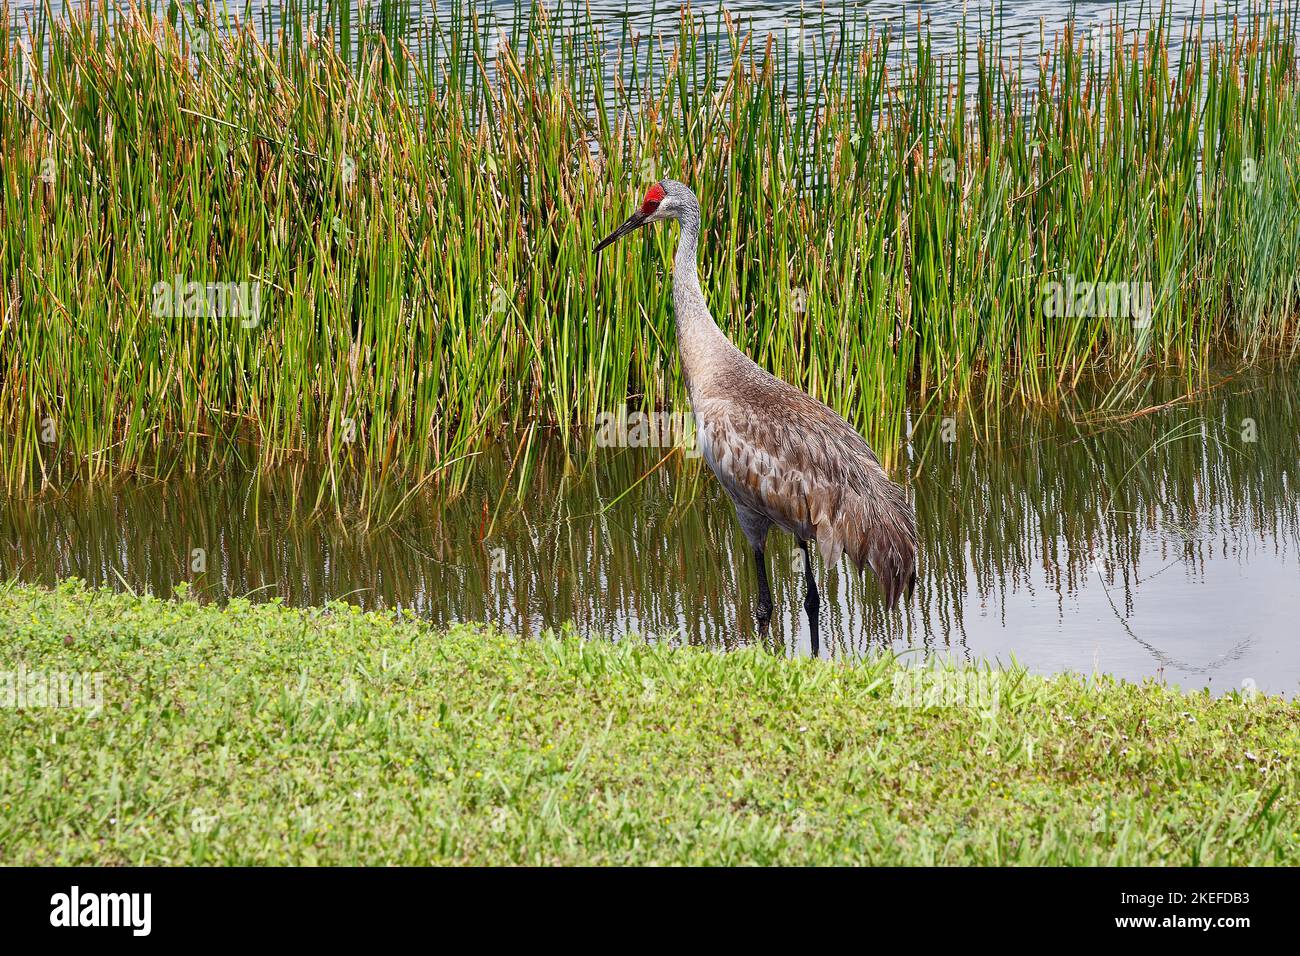 Sandhill Crane, standing in pond, water, green grass, very large bird, Grus canadensis, red forehead, tufted rump feathers, long neck, long legs, wild Stock Photo